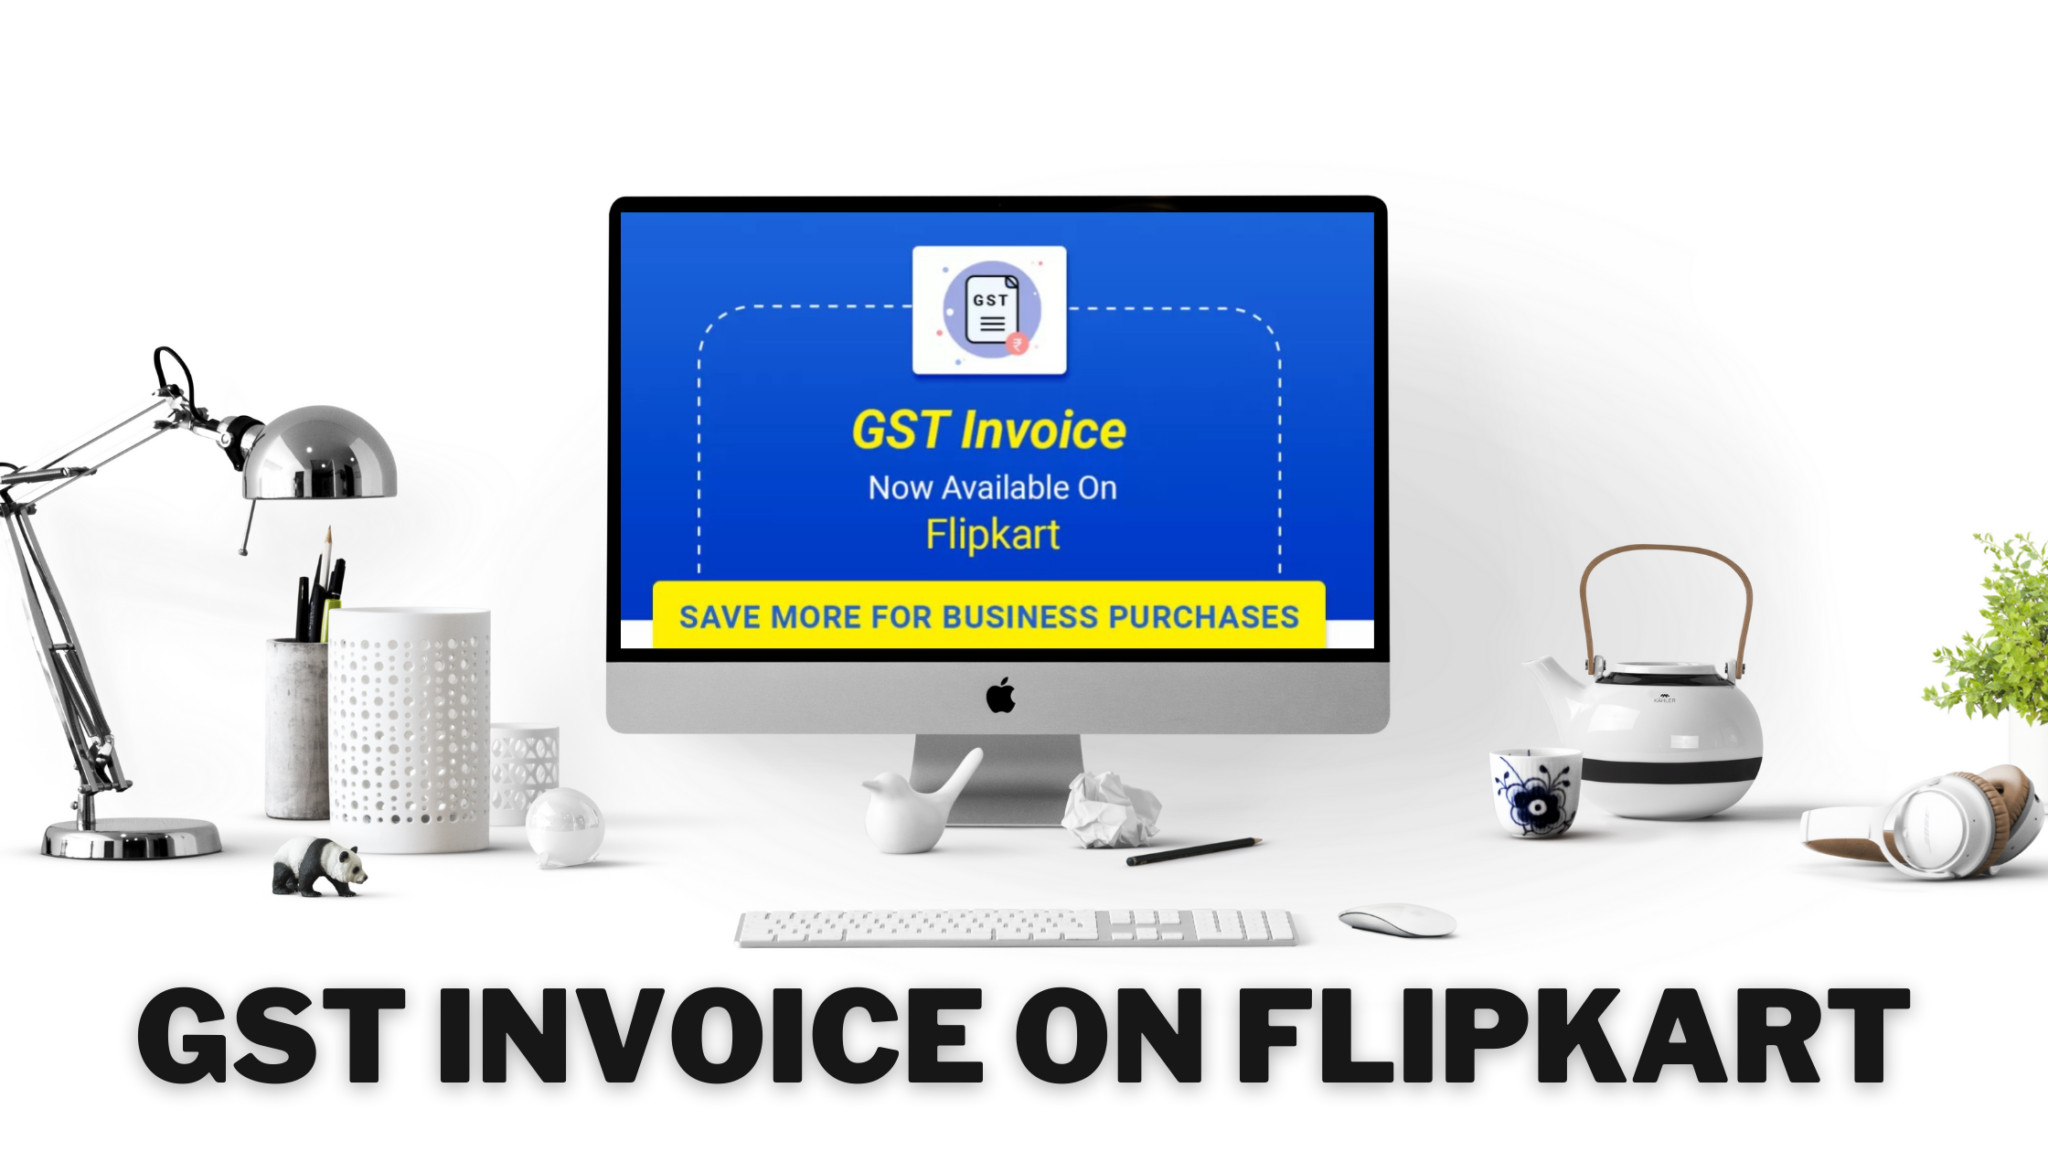 How to get a GST Invoice on Flipkart?